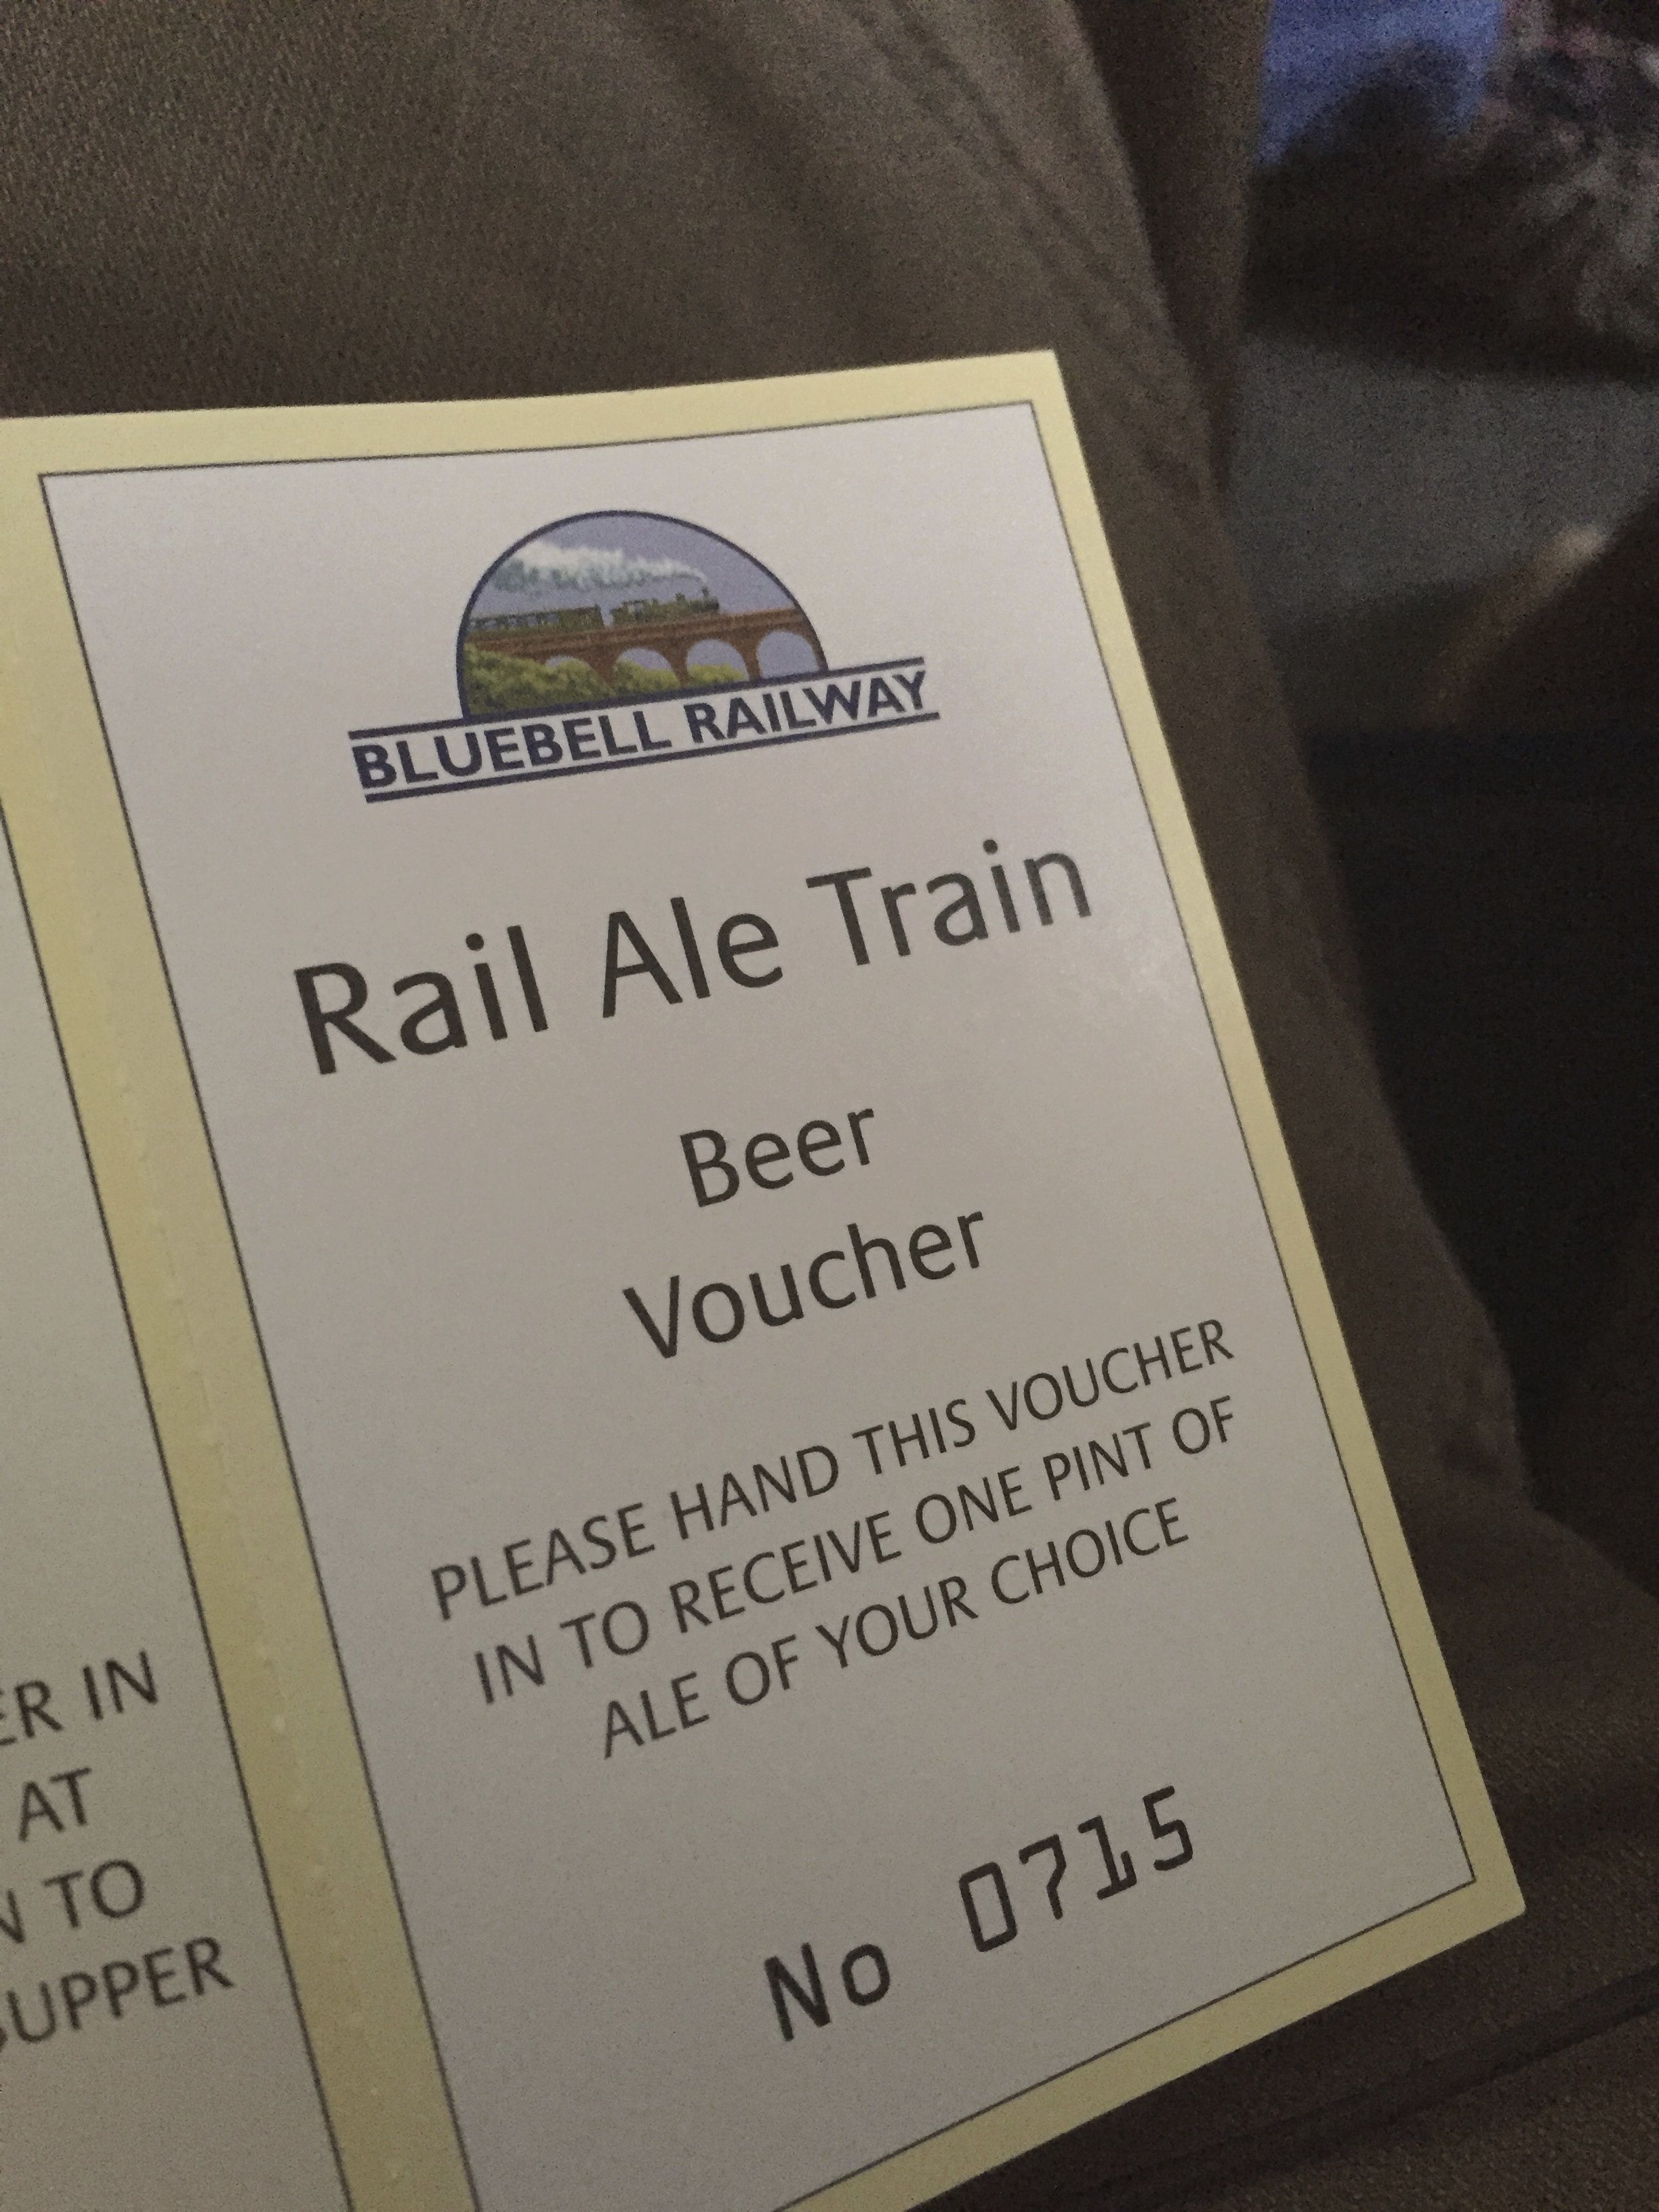 A beer voucher from Rail Ale, 31st July 2015